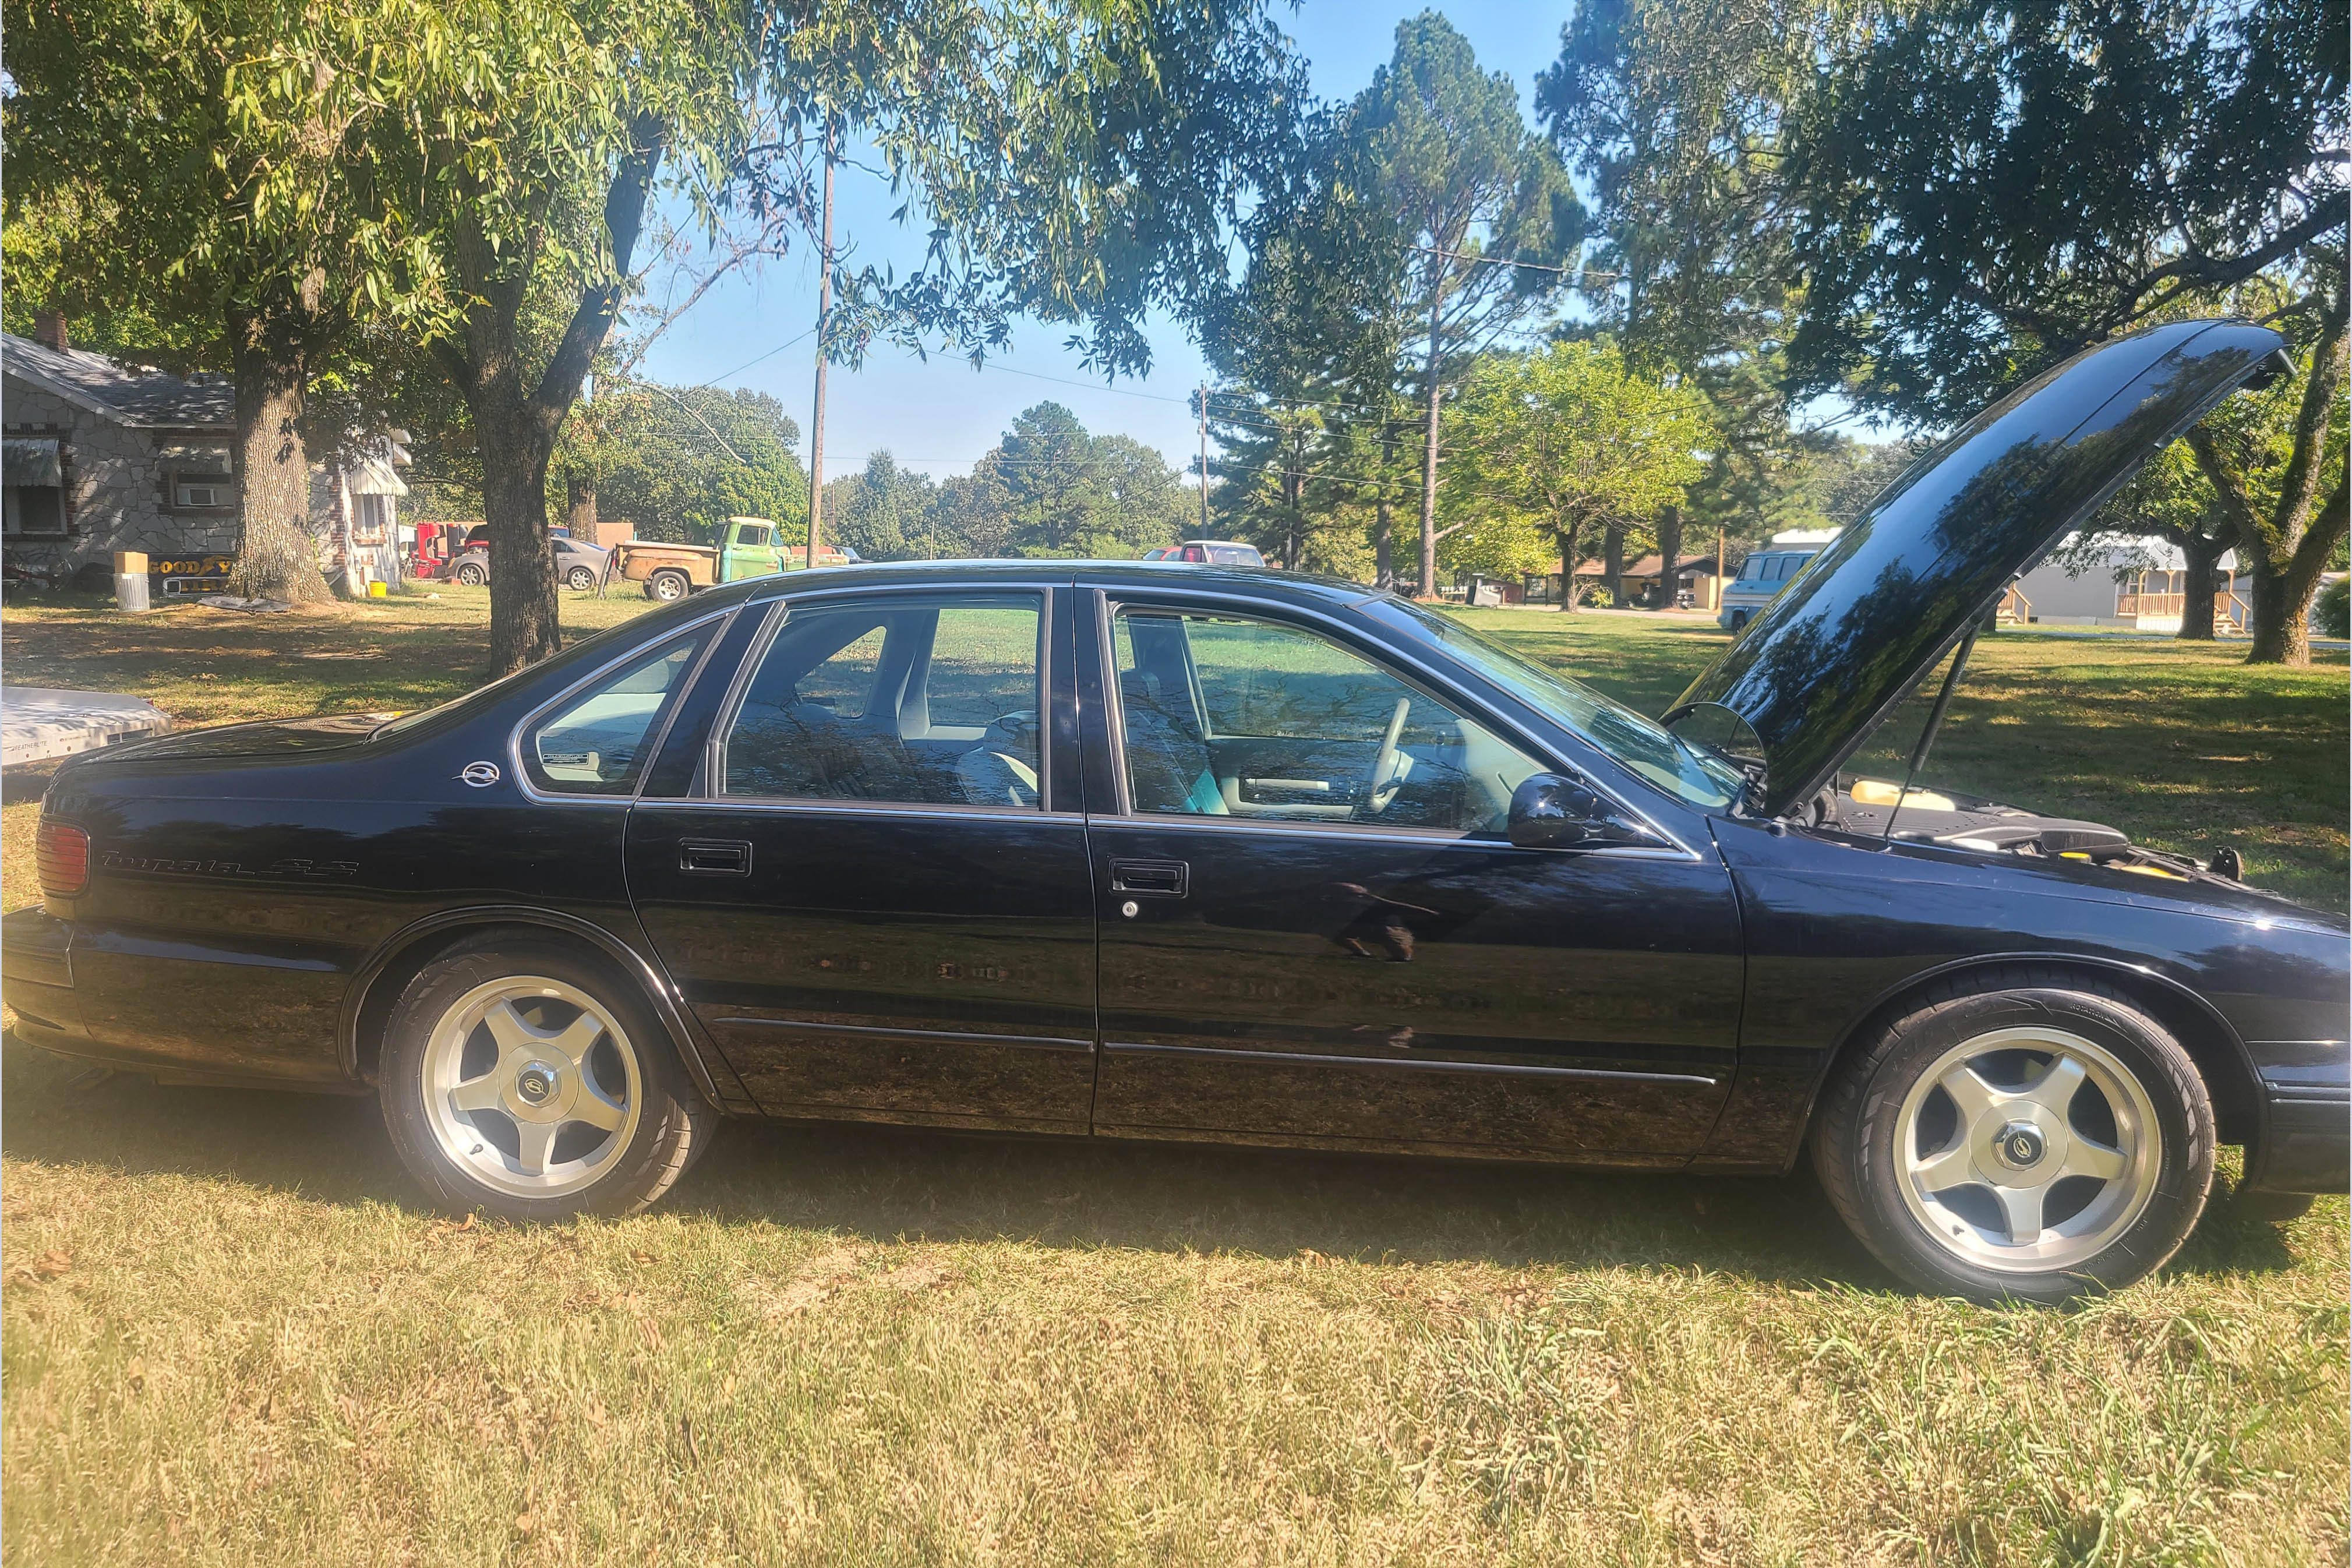 5th Image of a 1995 CHEVROLET IMPALA SS